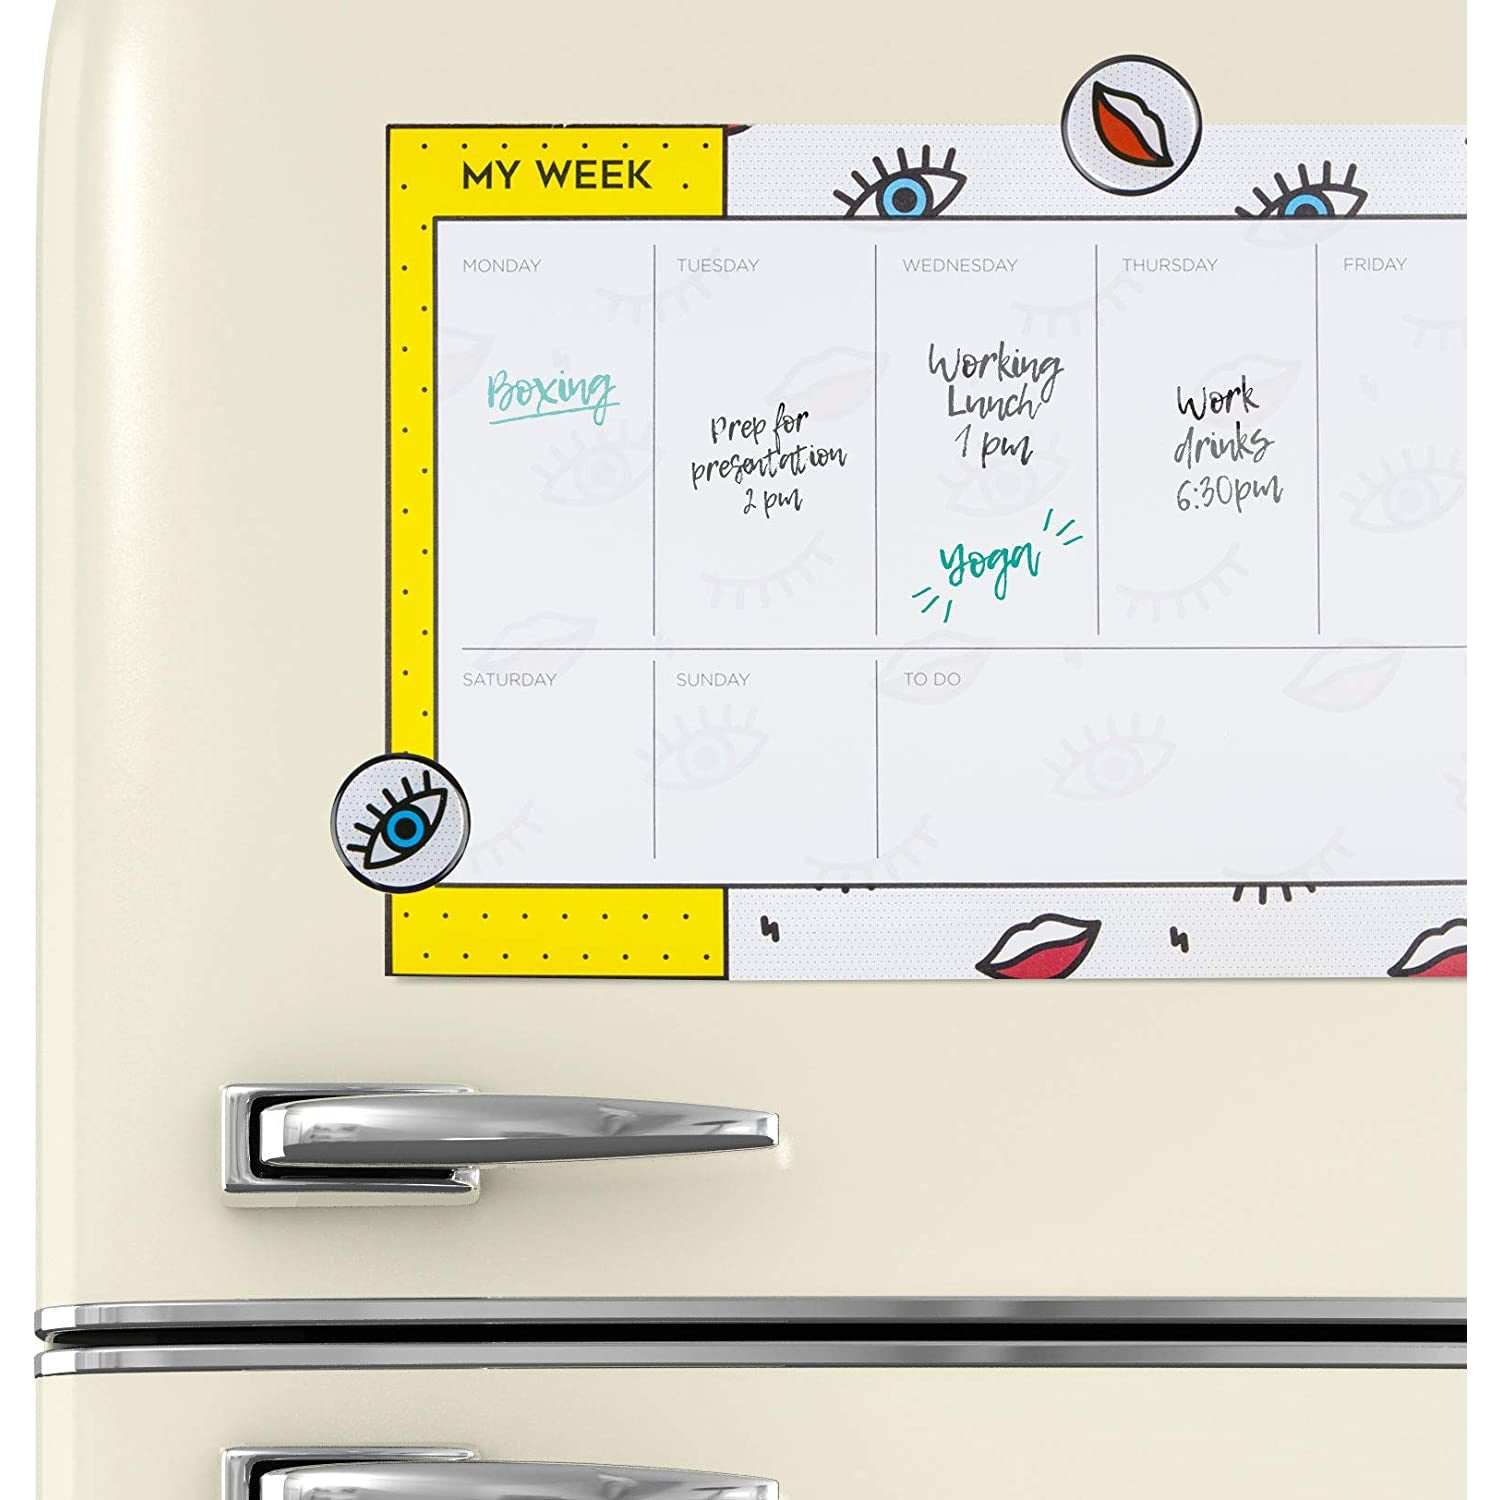 Wink Weekly Planner | 2 Magnets | Pop Art Eyes and Lips Print